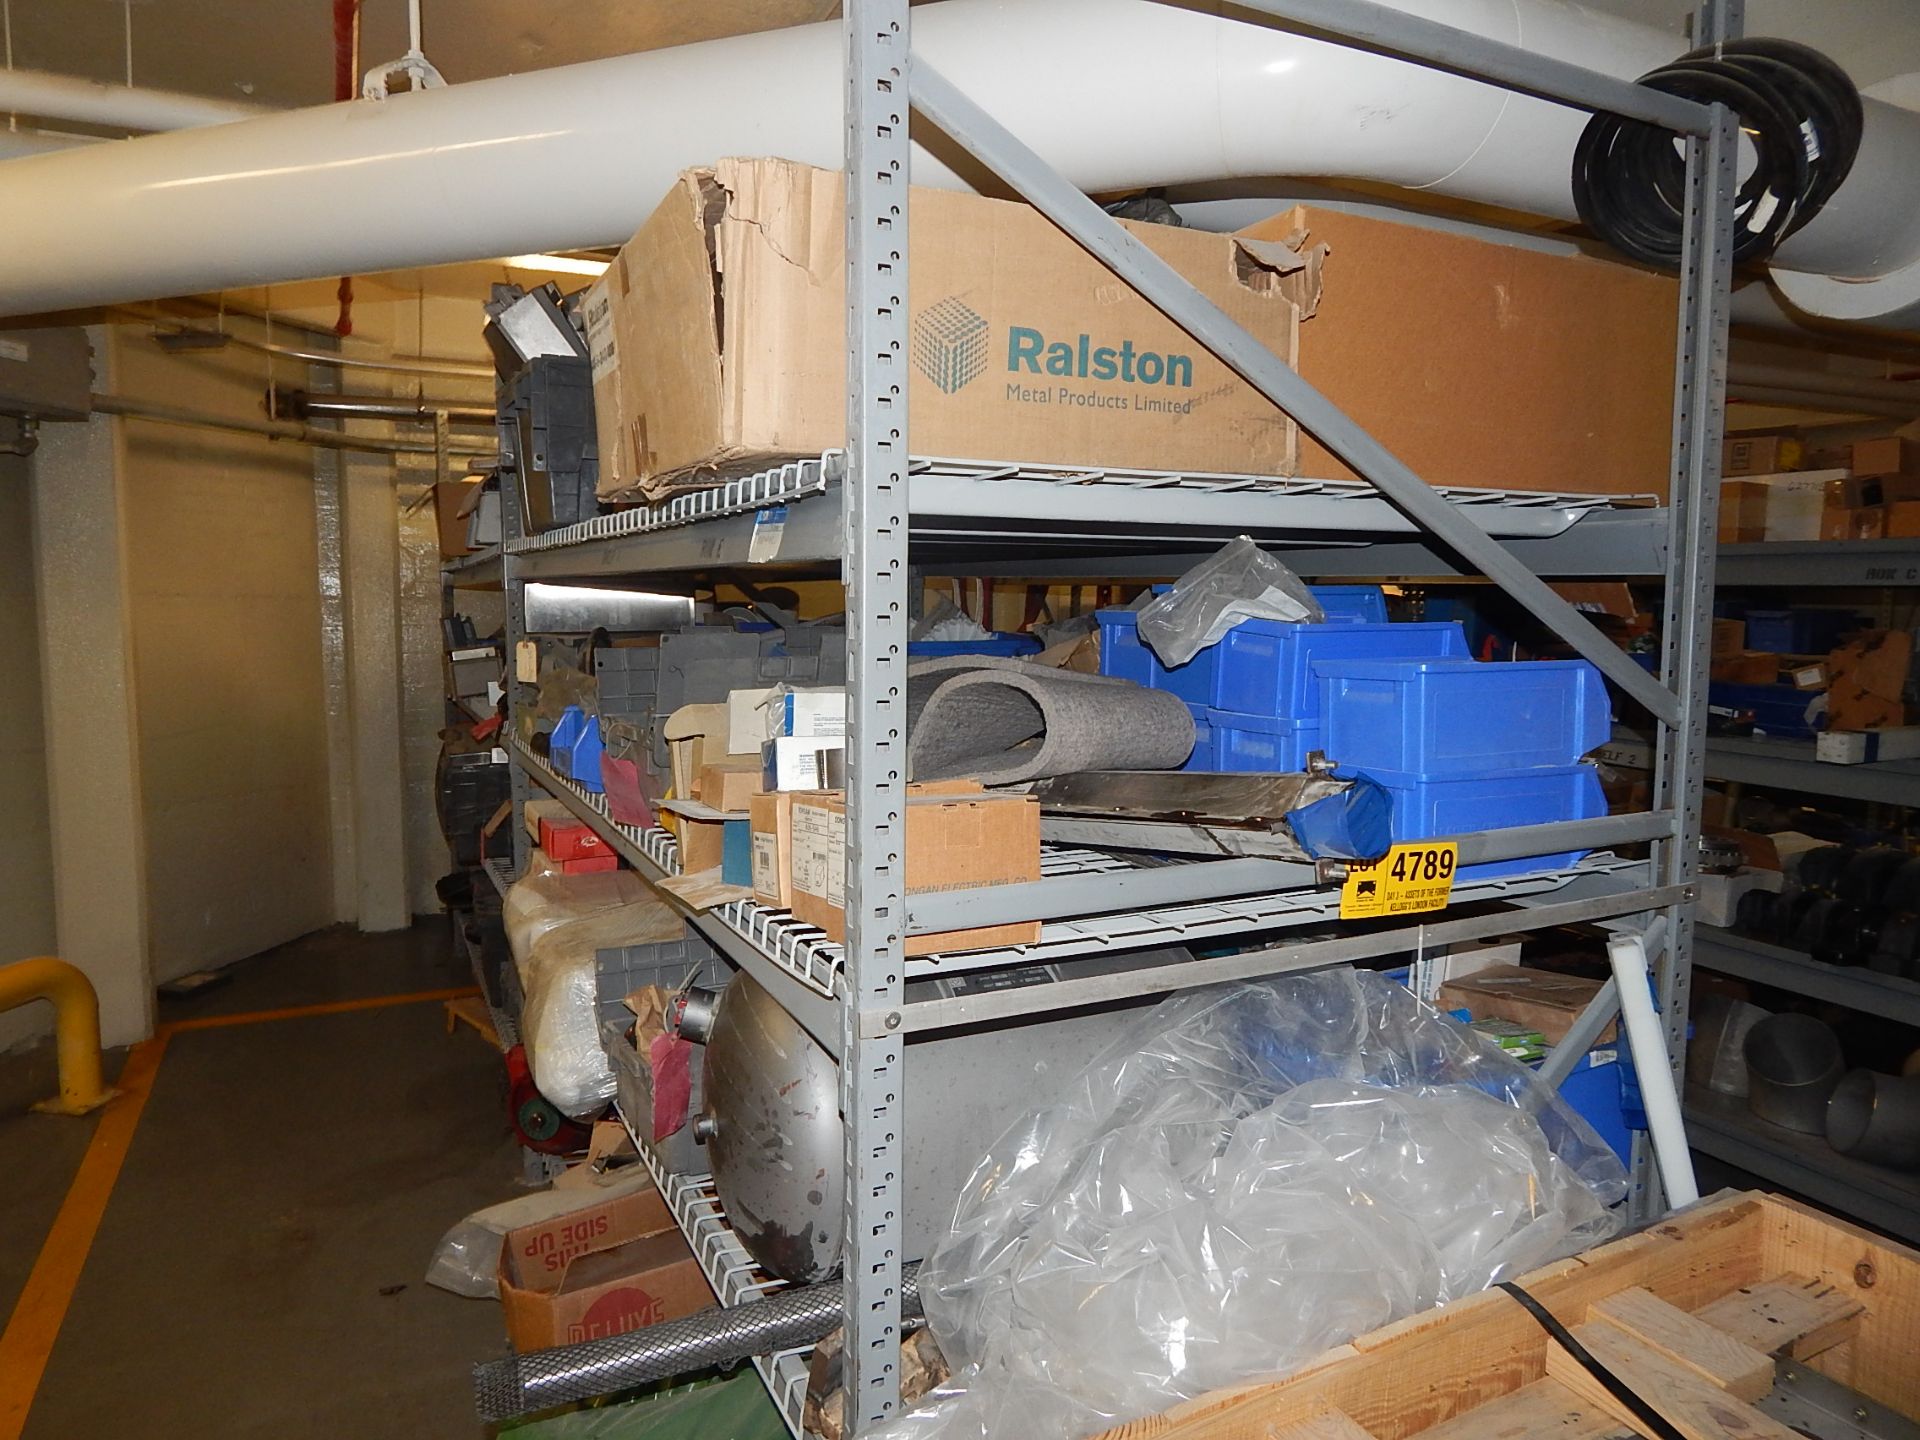 LOT/ SHELF WITH CONTENTS CONSISTING OF SPARE ELECTRICAL PARTS (BUILDING 1A, GROUND)